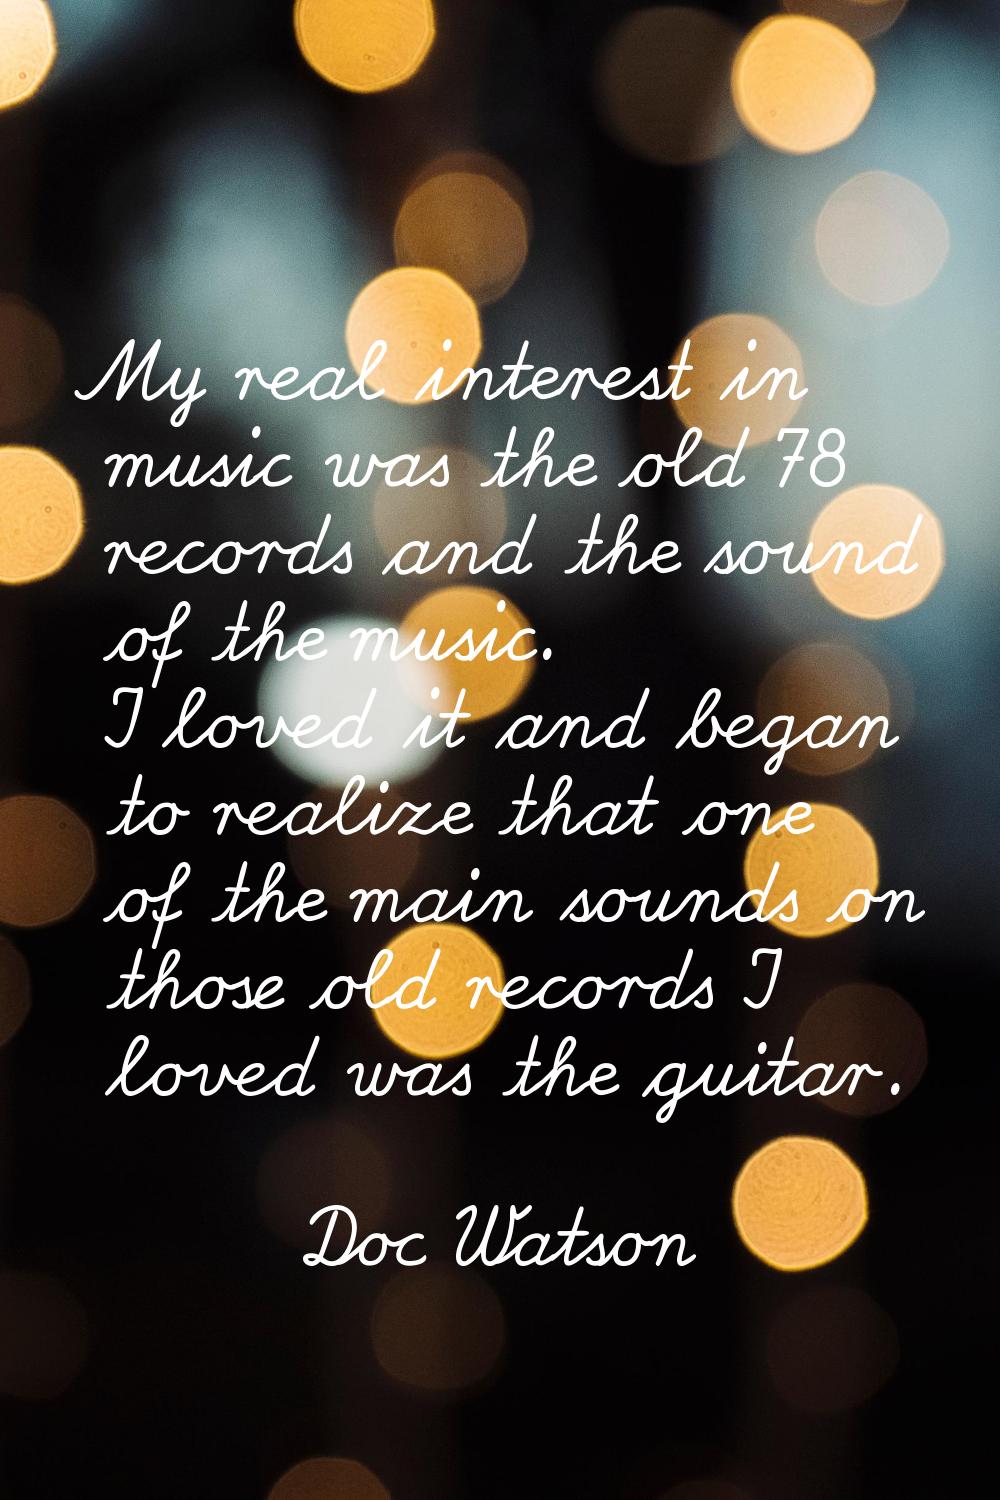 My real interest in music was the old 78 records and the sound of the music. I loved it and began t